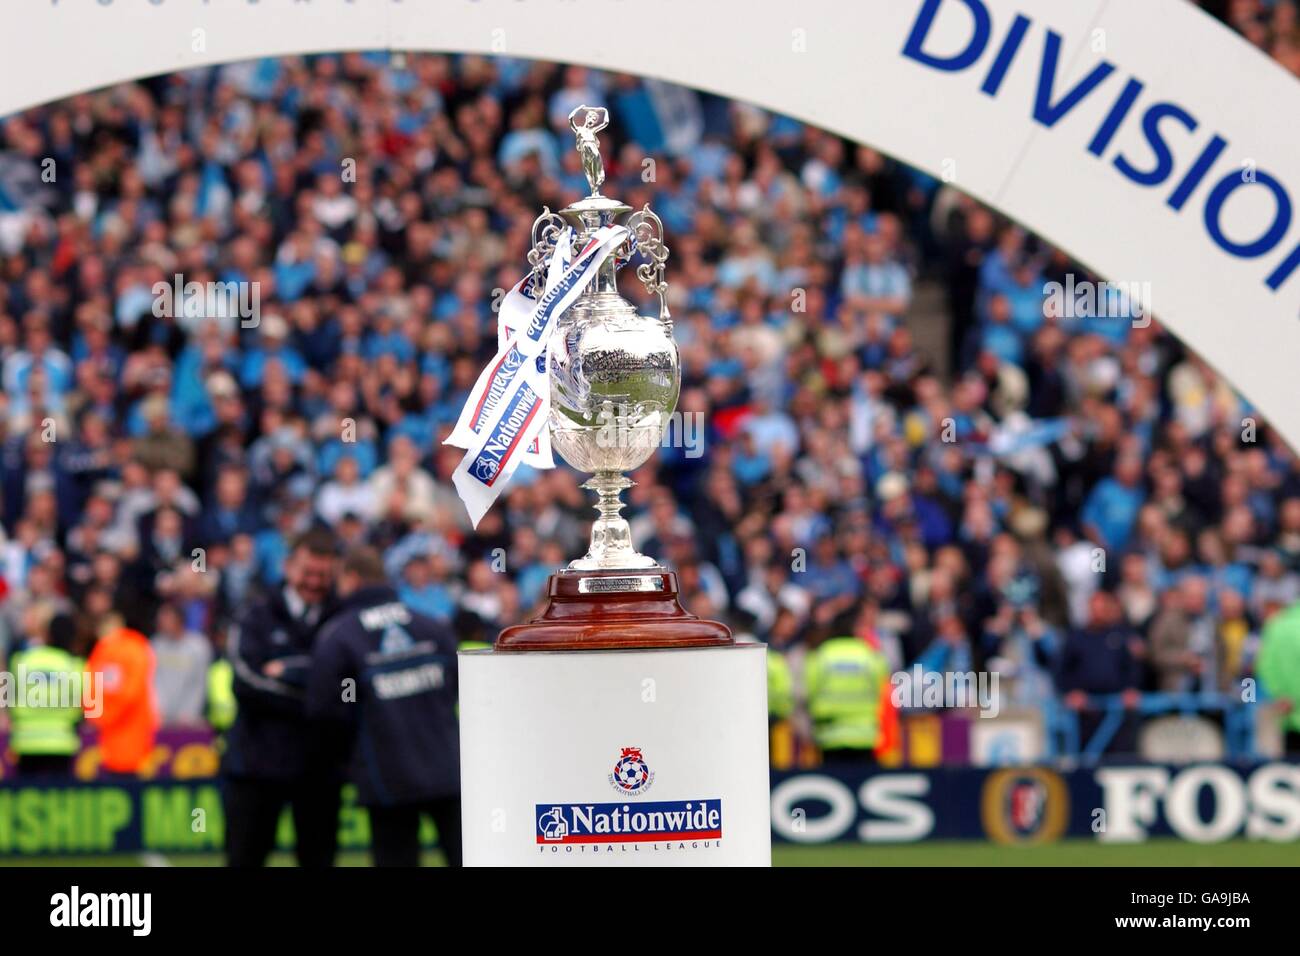 Soccer - Nationwide League Division One - Manchester City v Portsmouth. The Nationwide First Division Championship Trophy Stock Photo